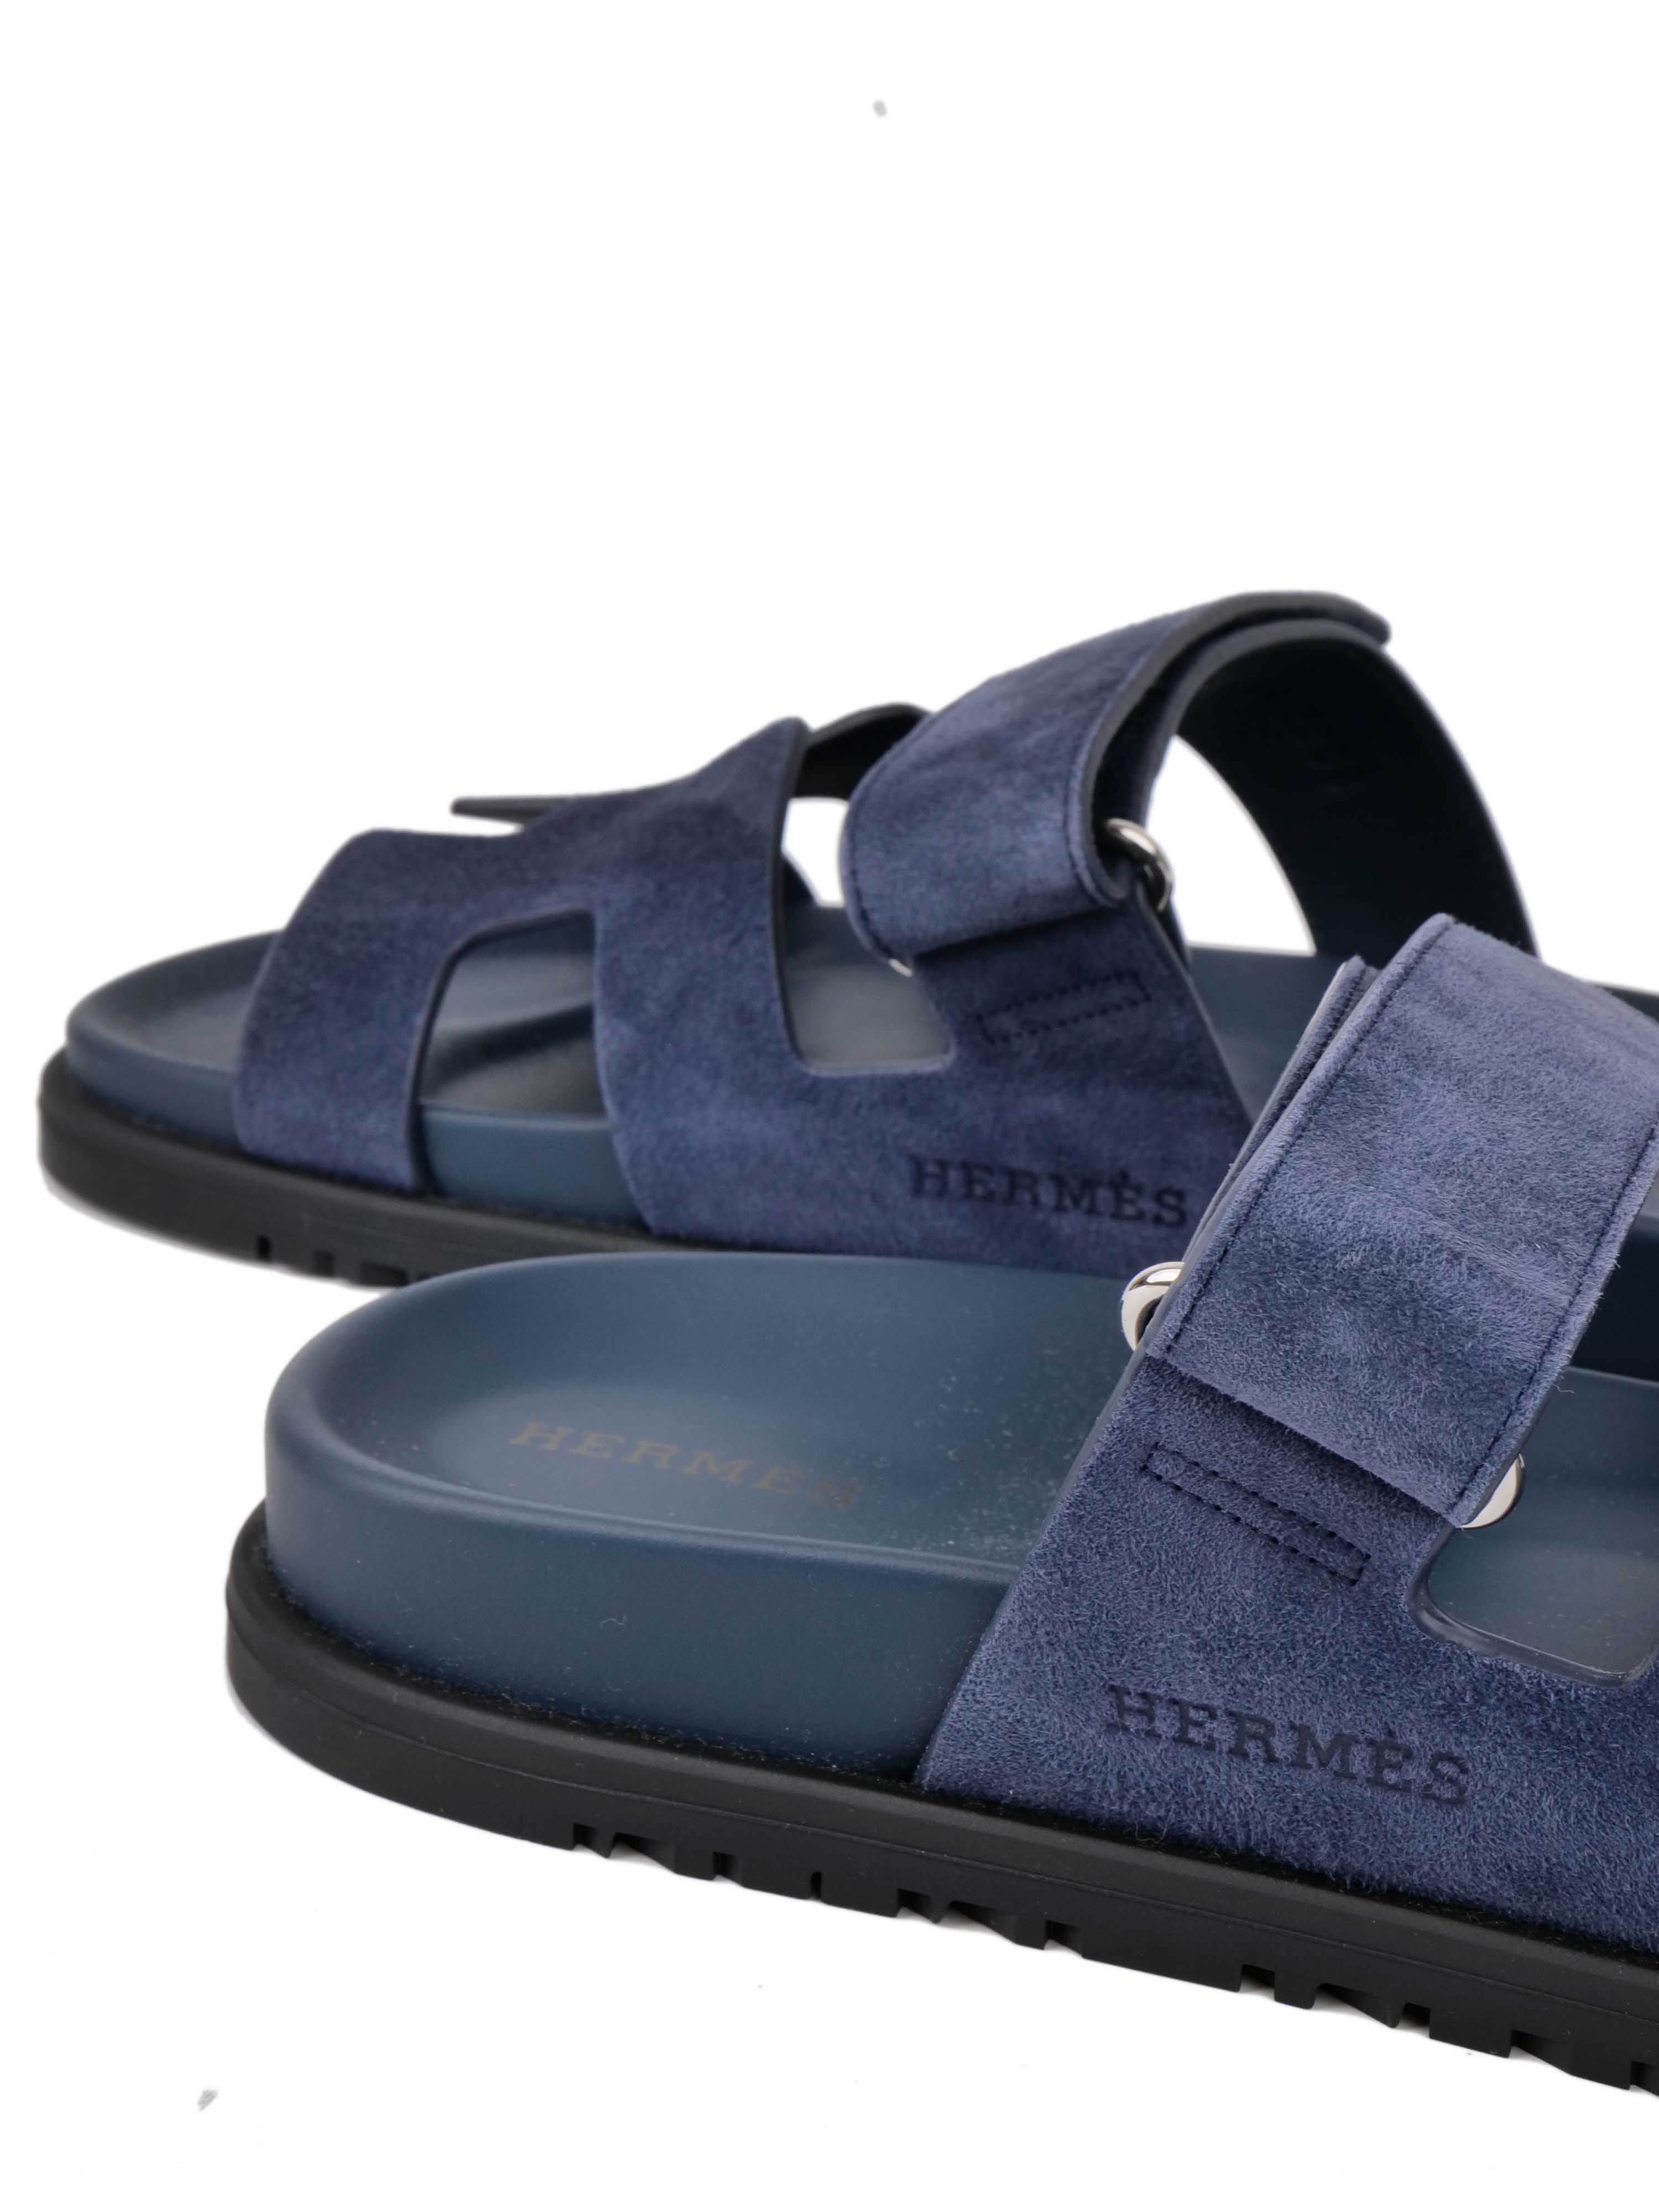 Hermes Chypre Navy Suede Sandals 37.5.